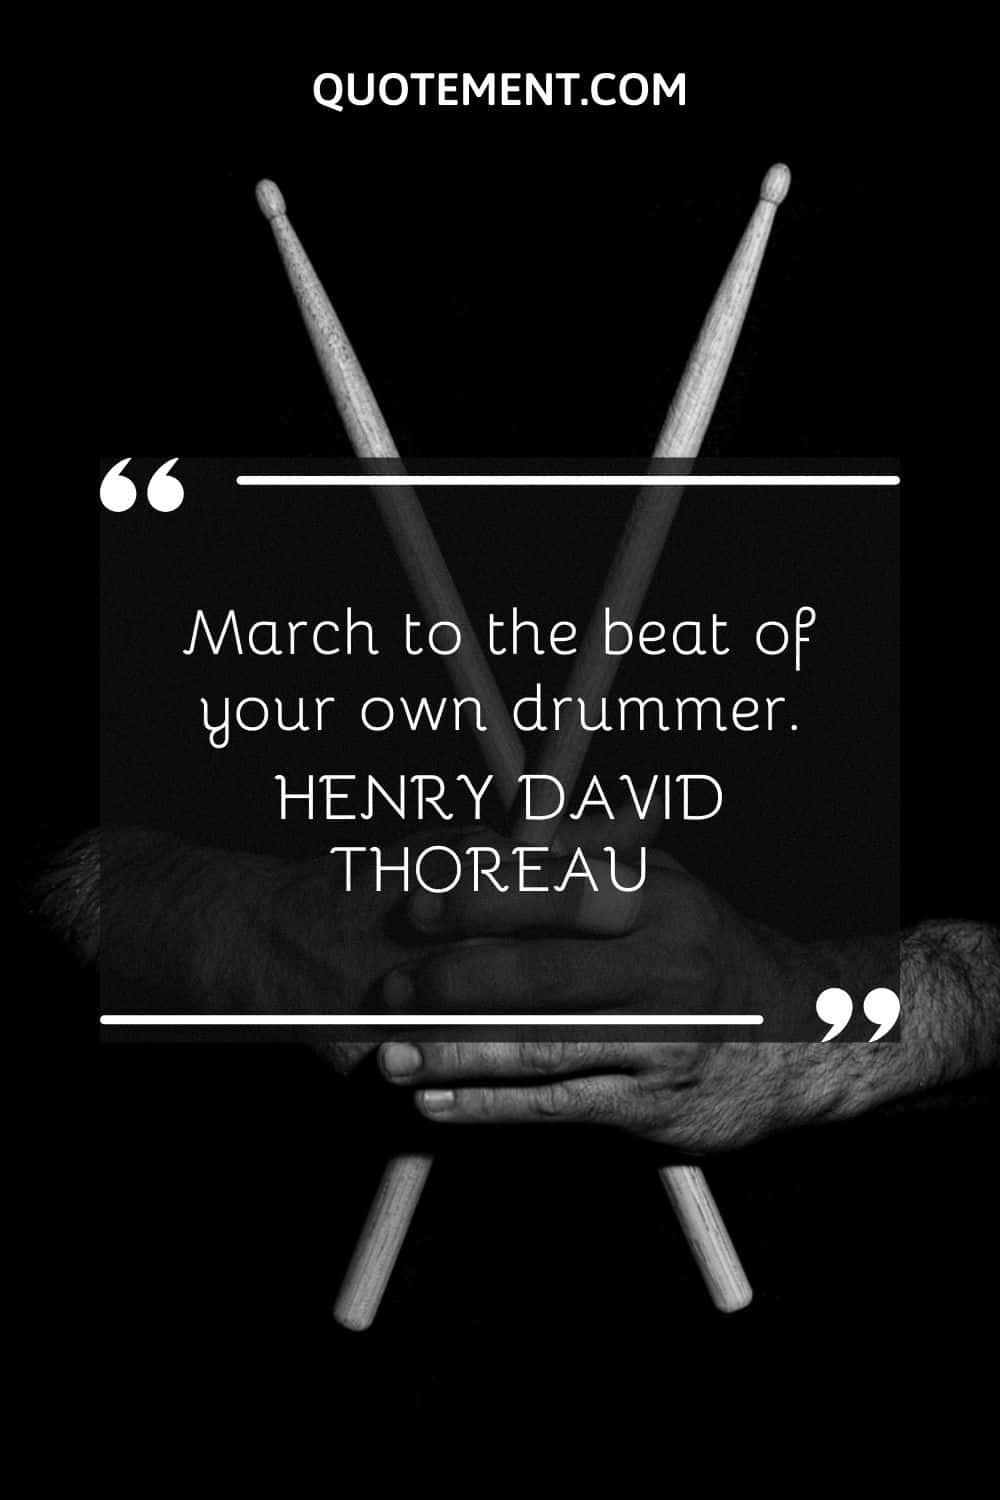 March to the beat of your own drummer